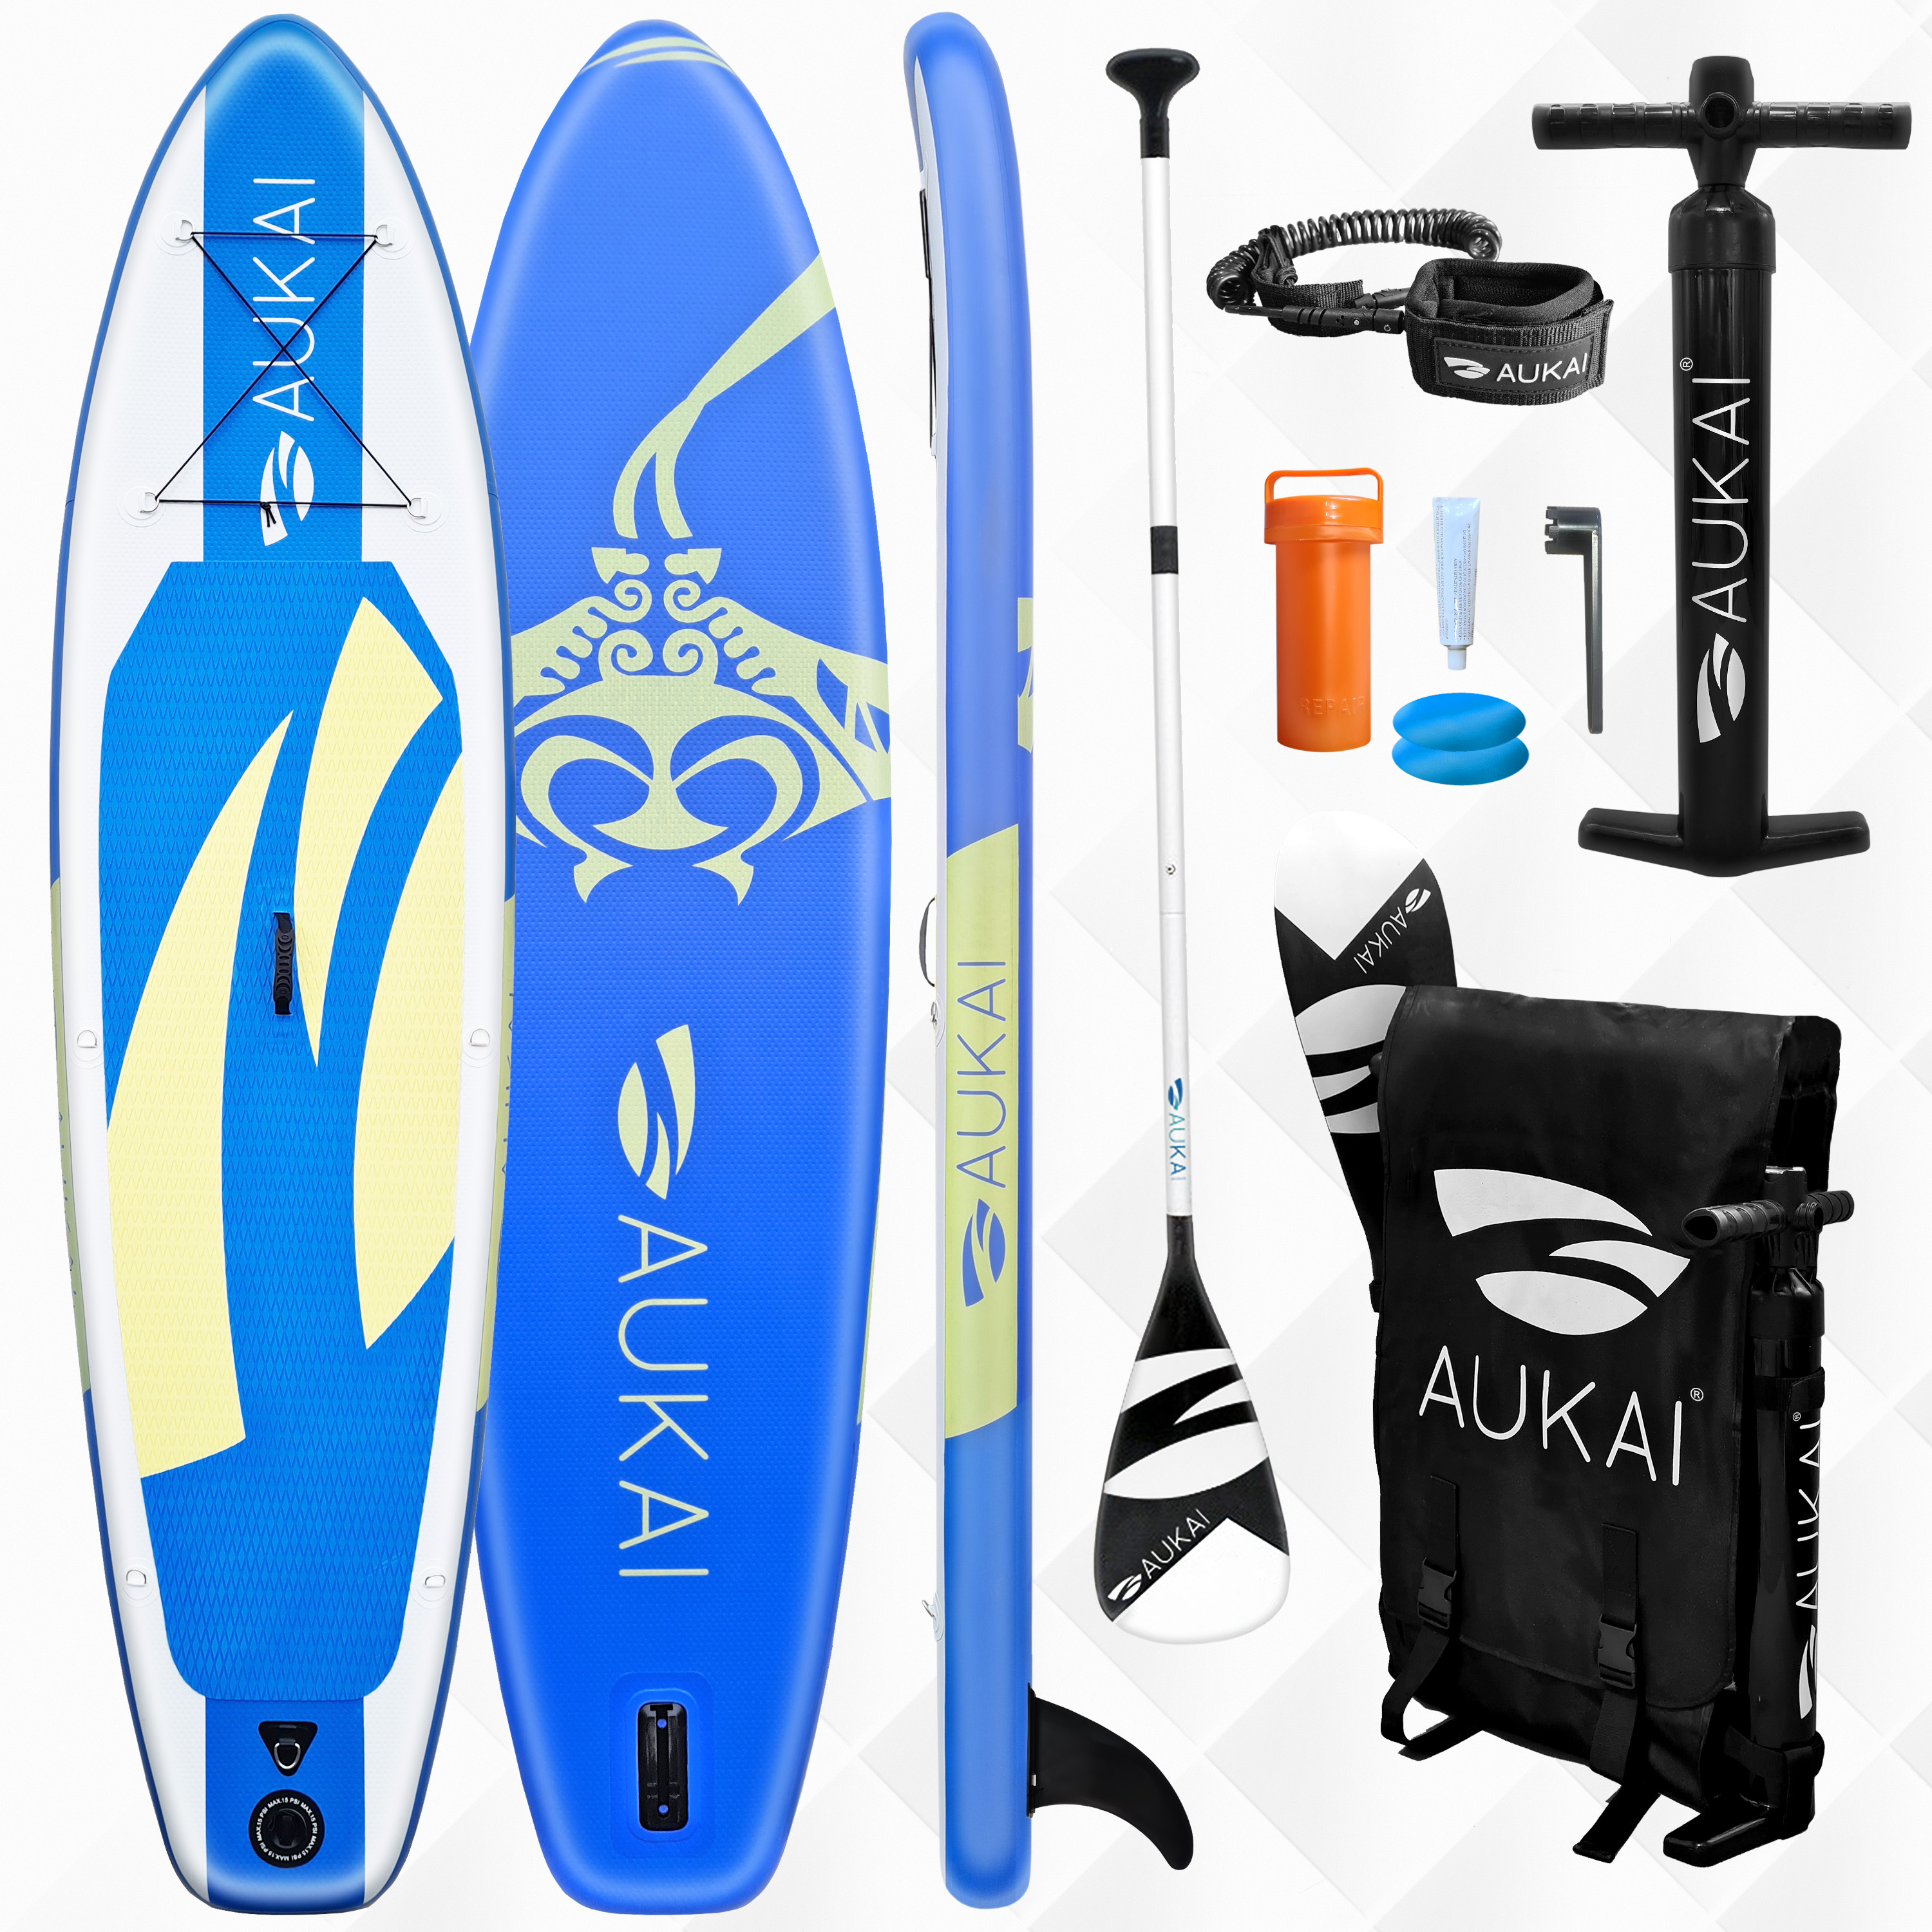 Aukai® Stand Up Paddle Board 320cm 